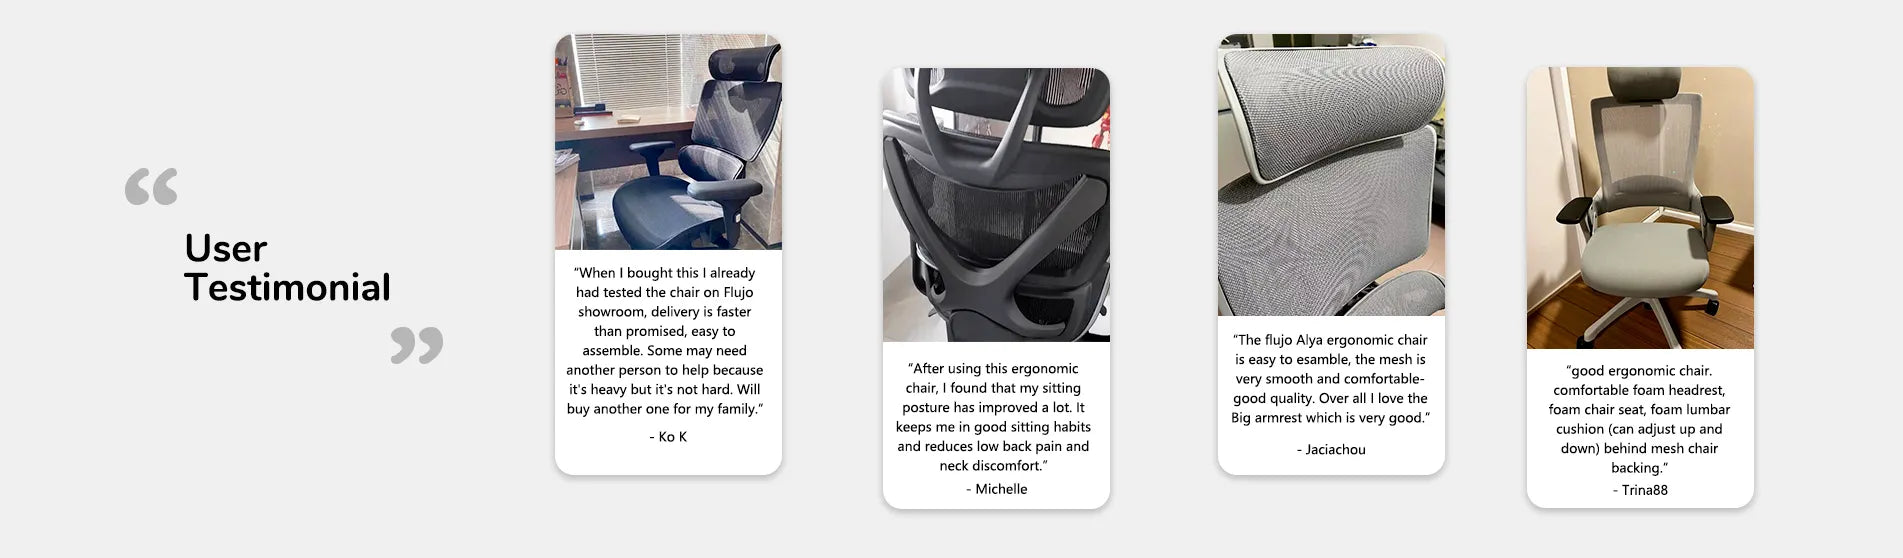 Flujo Ergonomic Chairs User Testimonials, highlighting comfort, ease of assembly, and support for better posture.